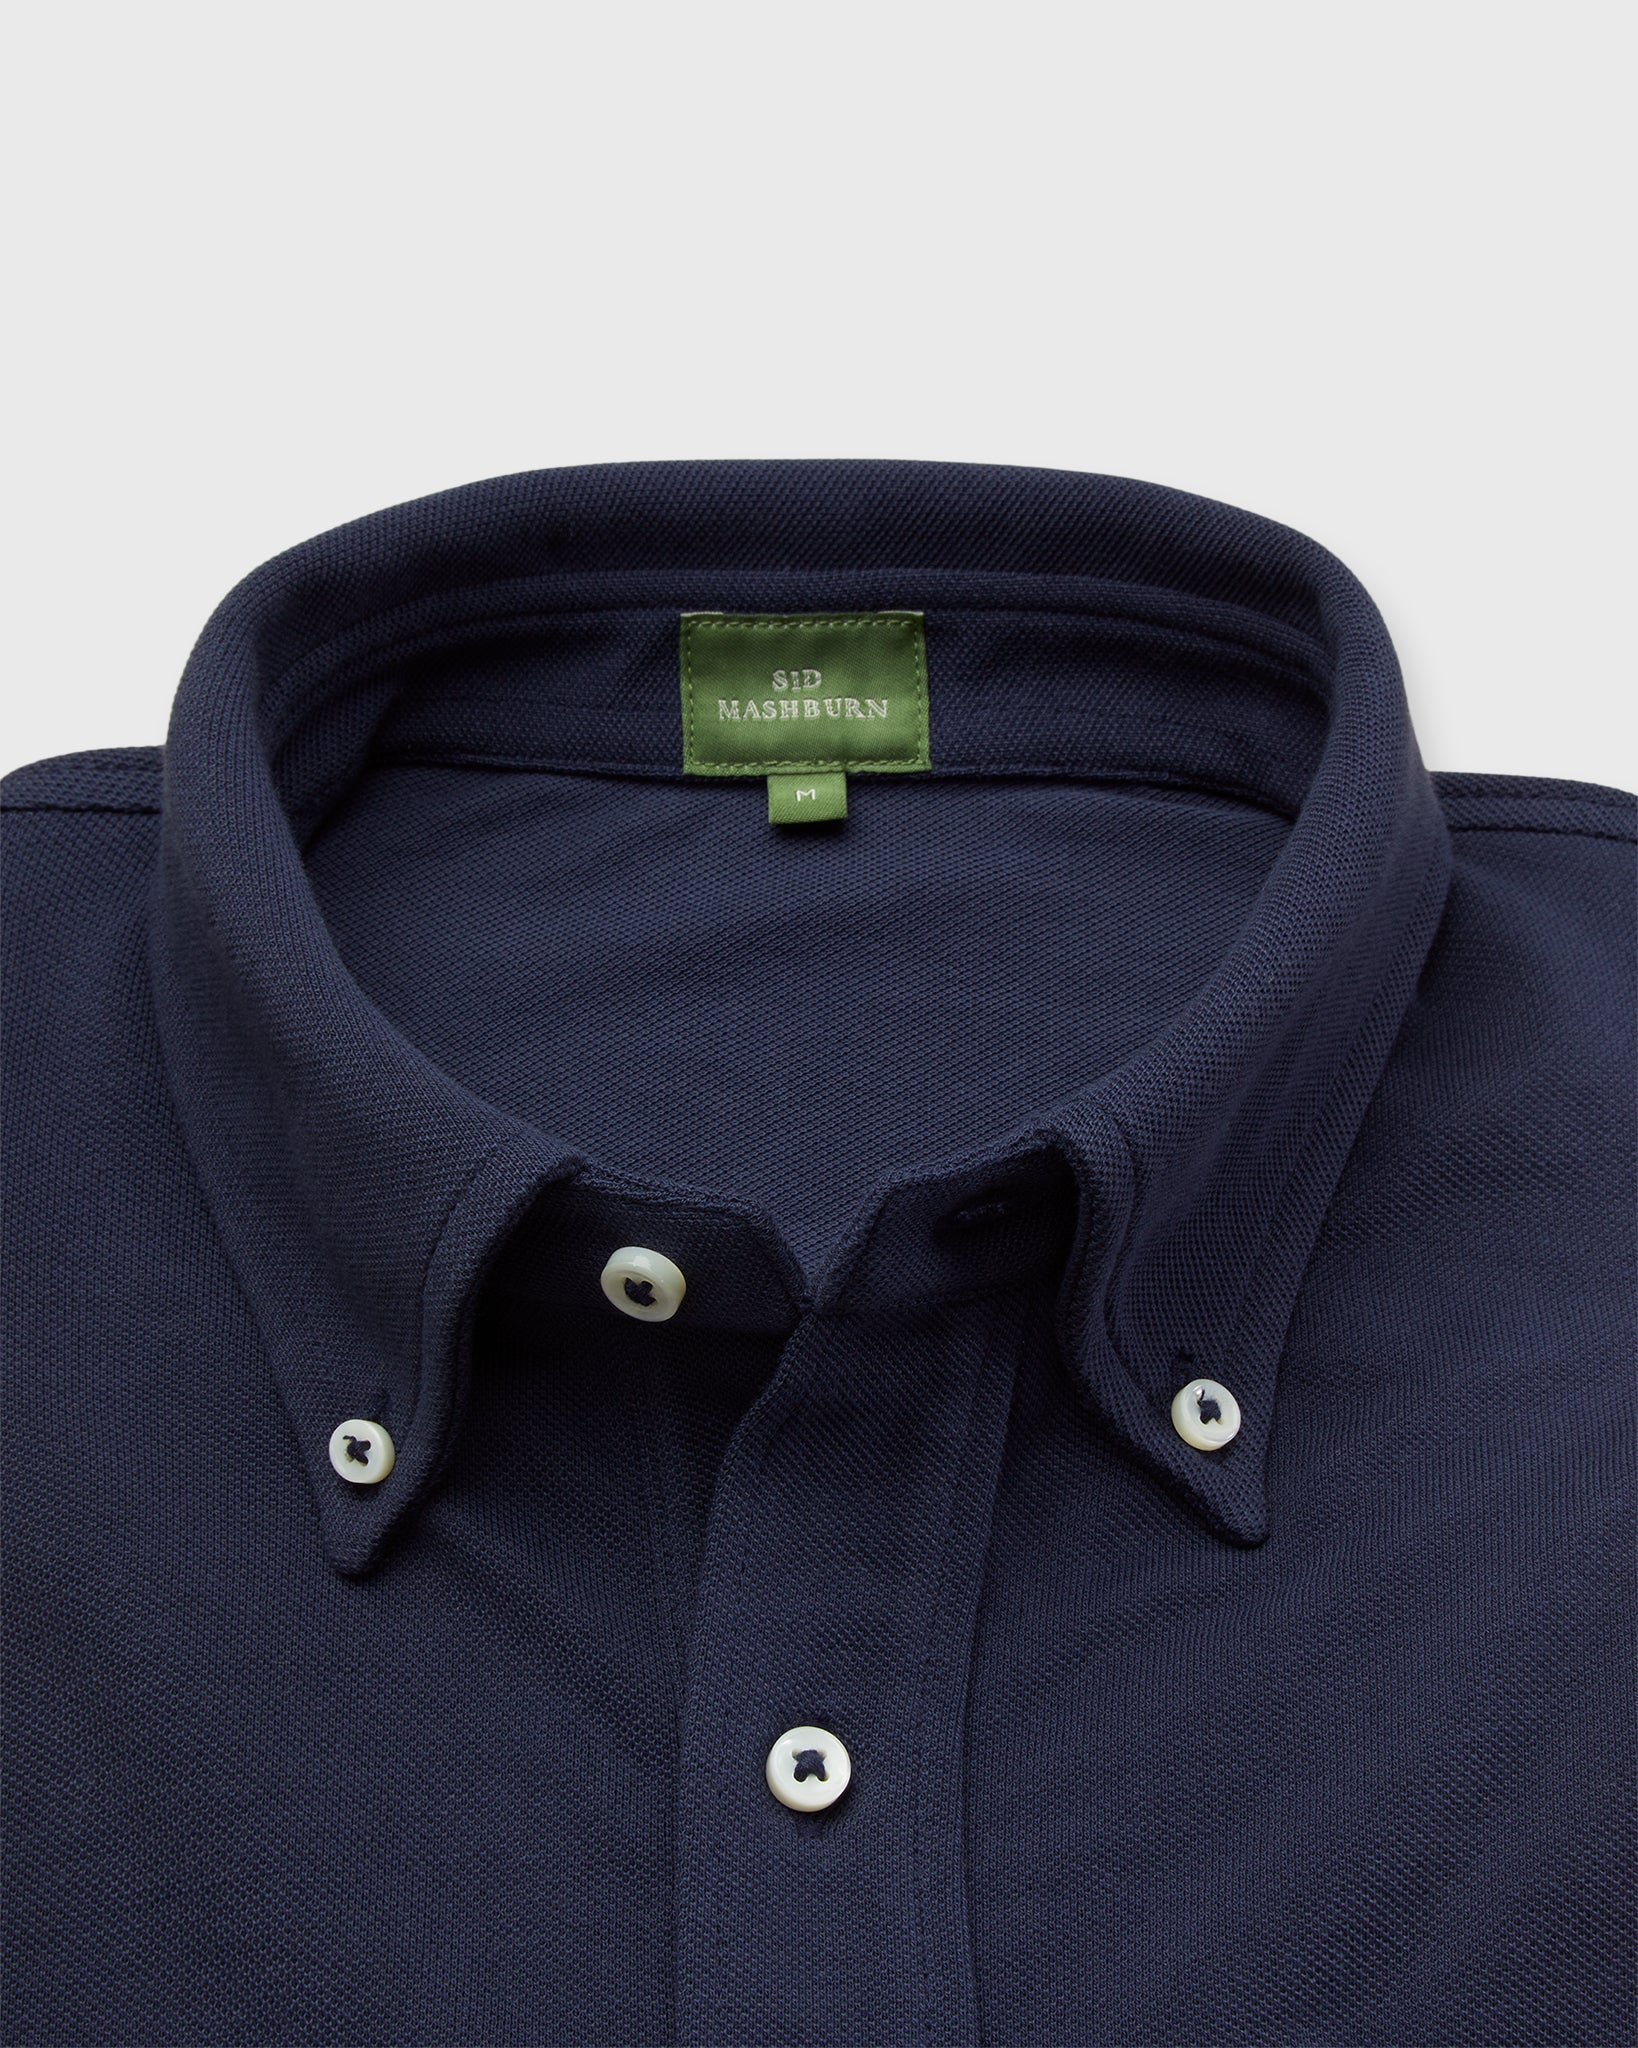 Short-Sleeved Knit Button-Down Popover Shirt in Navy Pima Pique